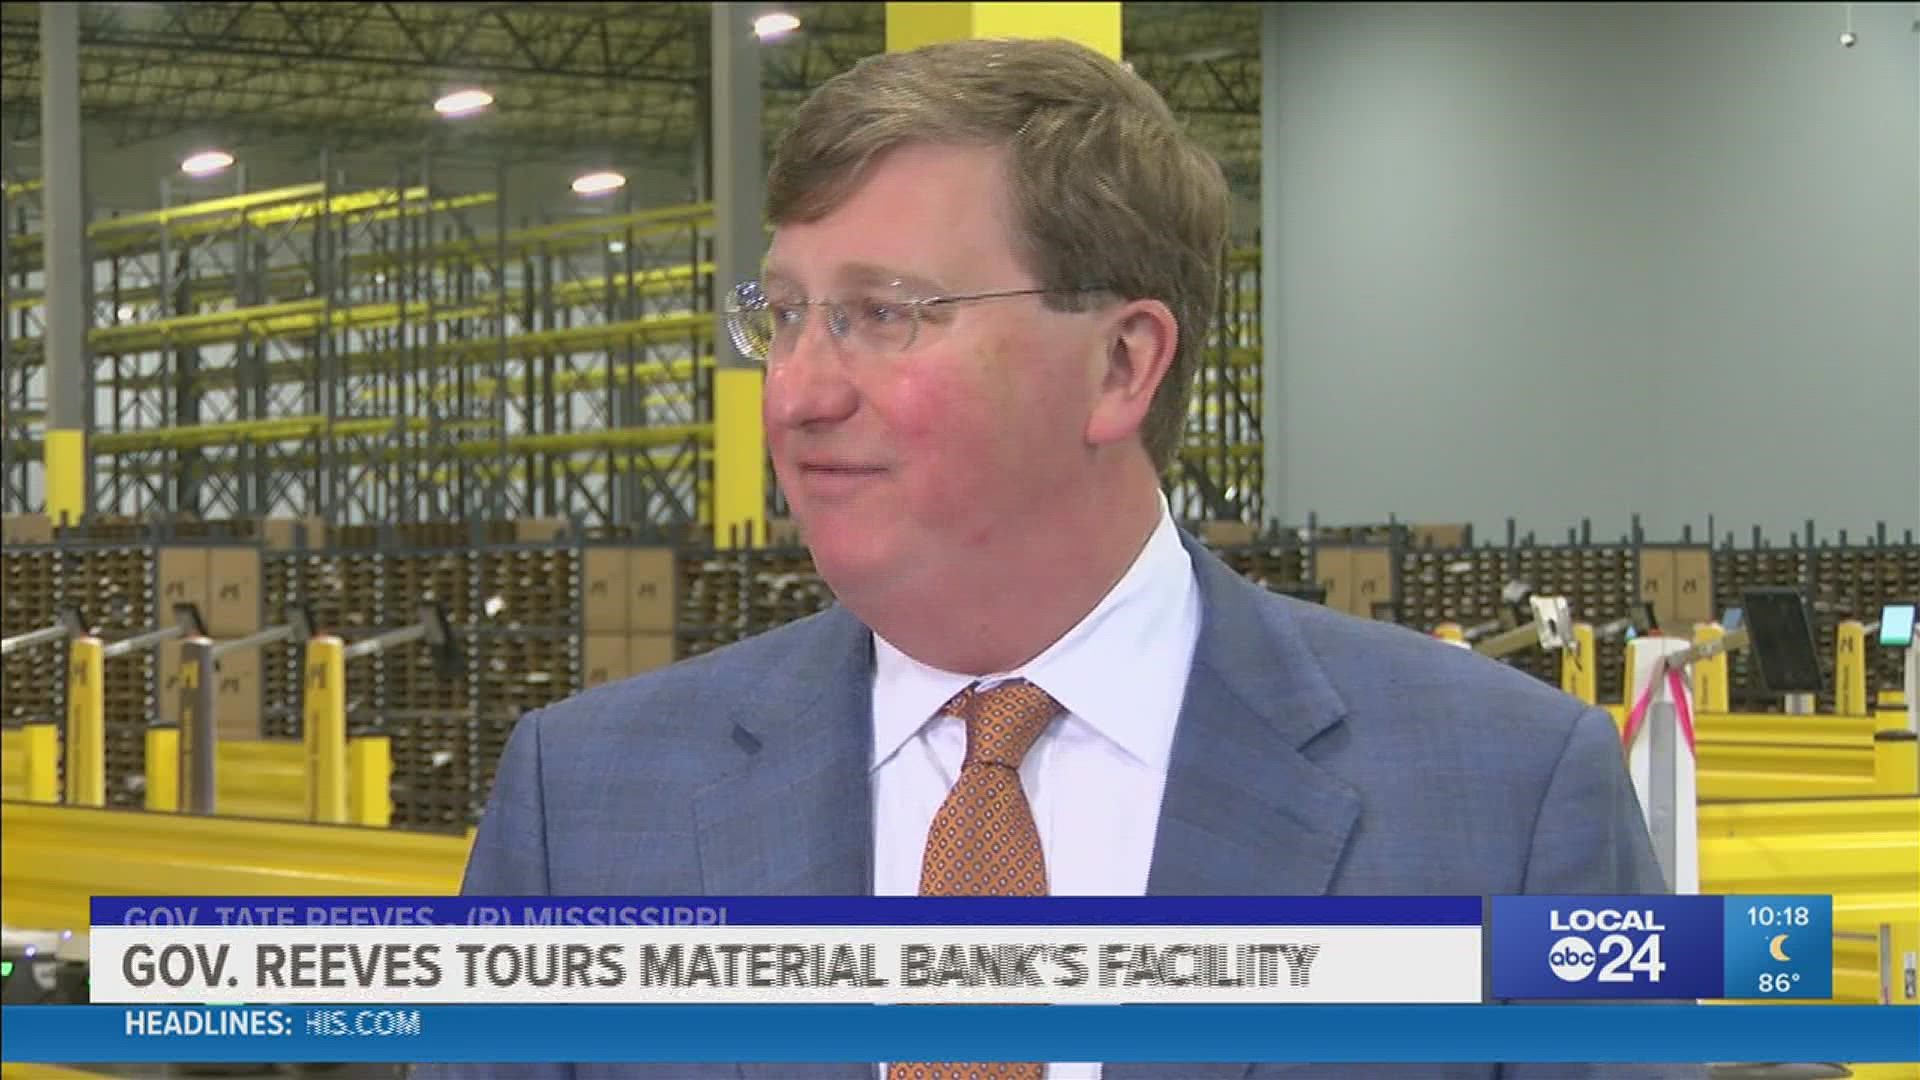 Material Bank said it is committed to creating 300 jobs in DeSoto County.